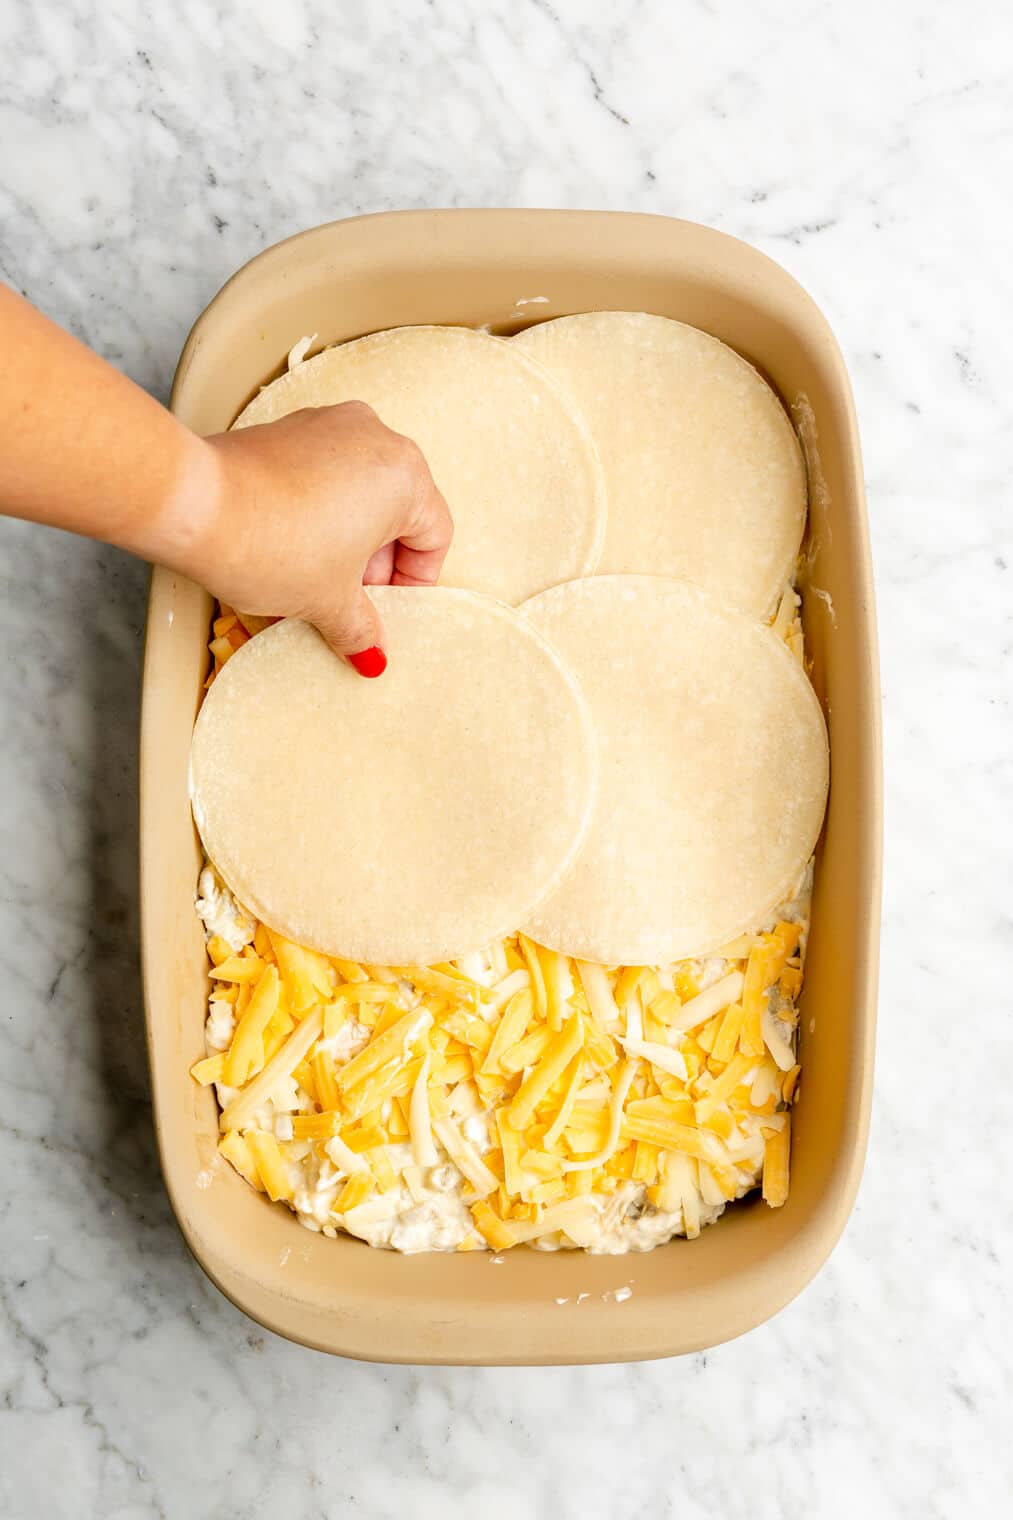 Hand adding another layer of tortillas on top of creamy chicken mixture and shredded cheese in casserole dish.